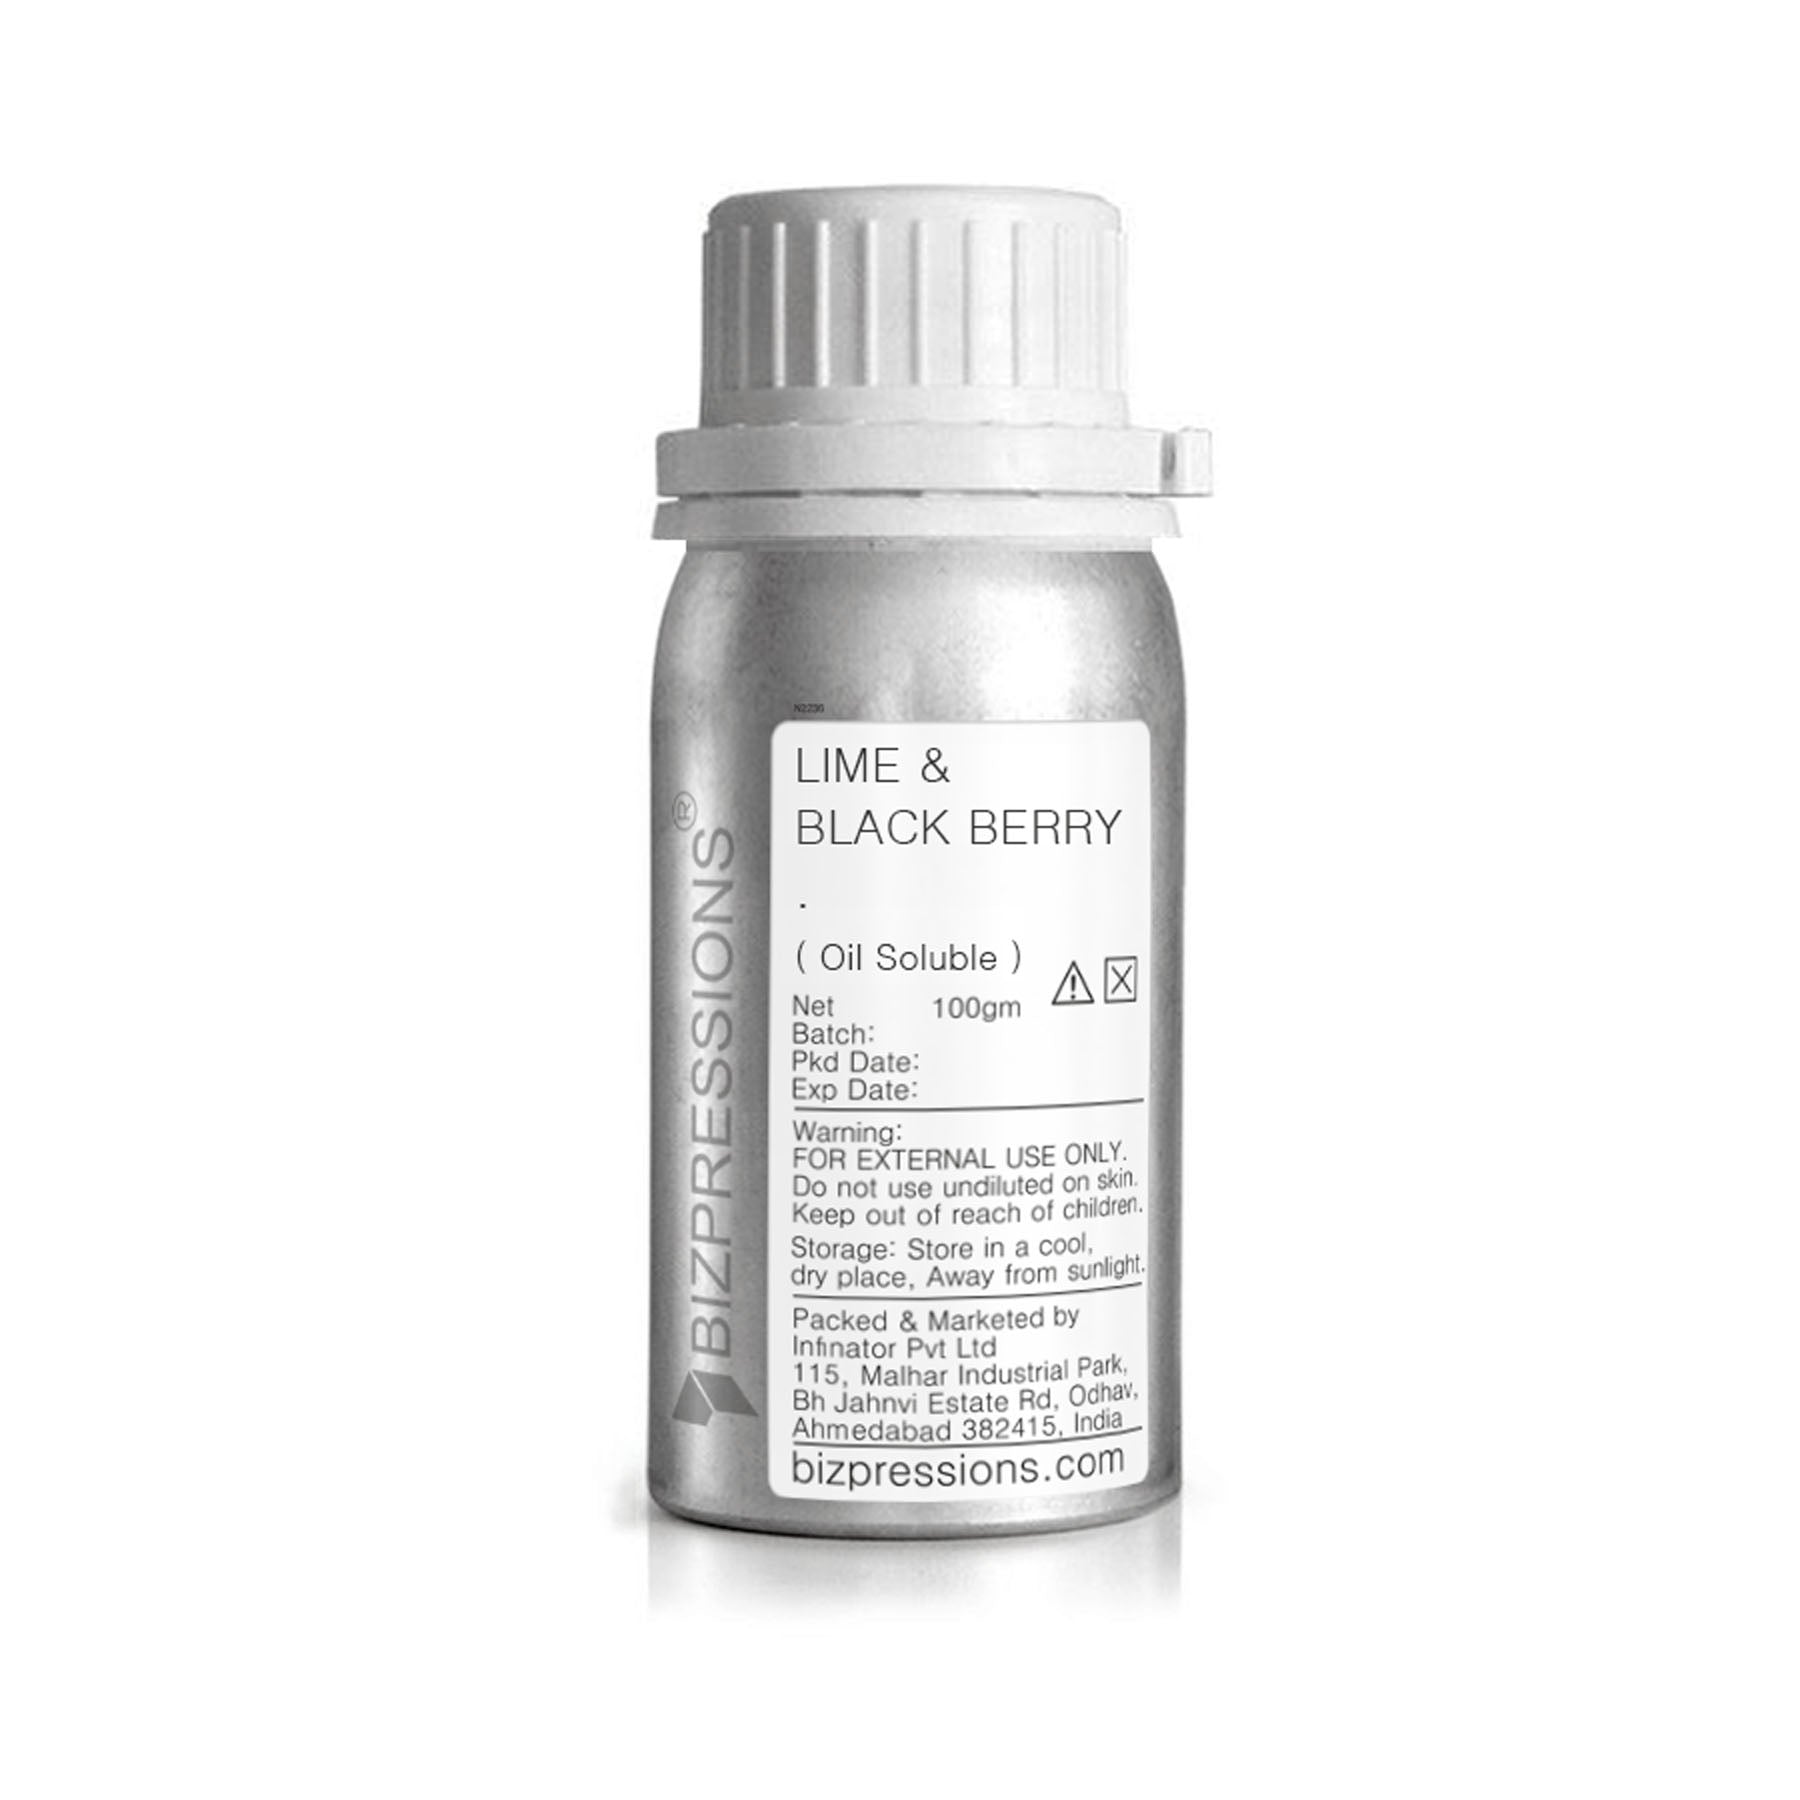 LIME & BLACK BERRY - Fragrance ( Oil Soluble ) - 100 gm